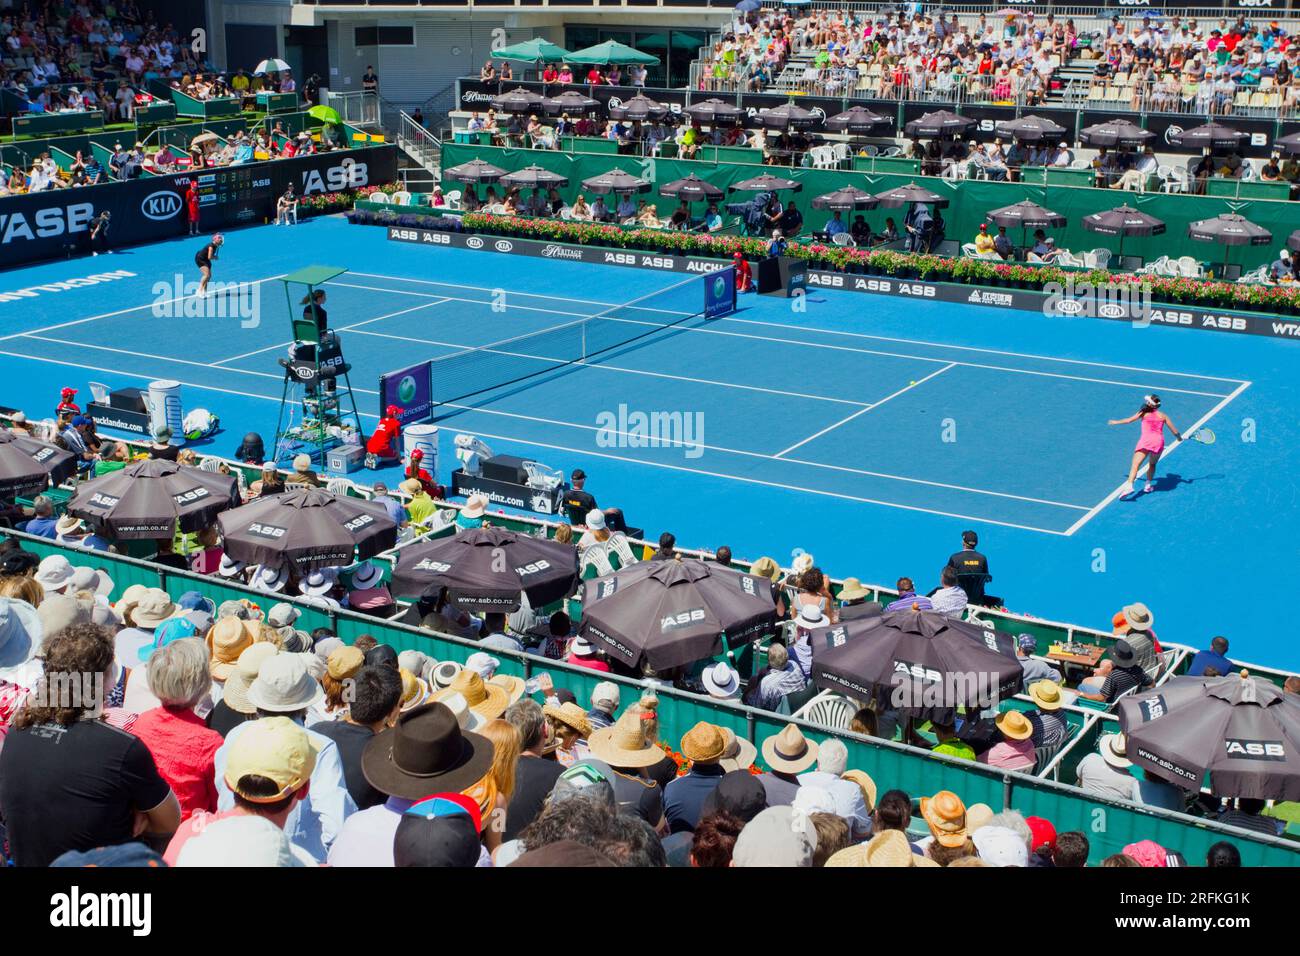 An overview of the ASB Tennis Centre in Auckland as Aravane Rezai, France, left, plays against Shuai Peng, China at the ASB Classic Women's Tennis Tou Stock Photo